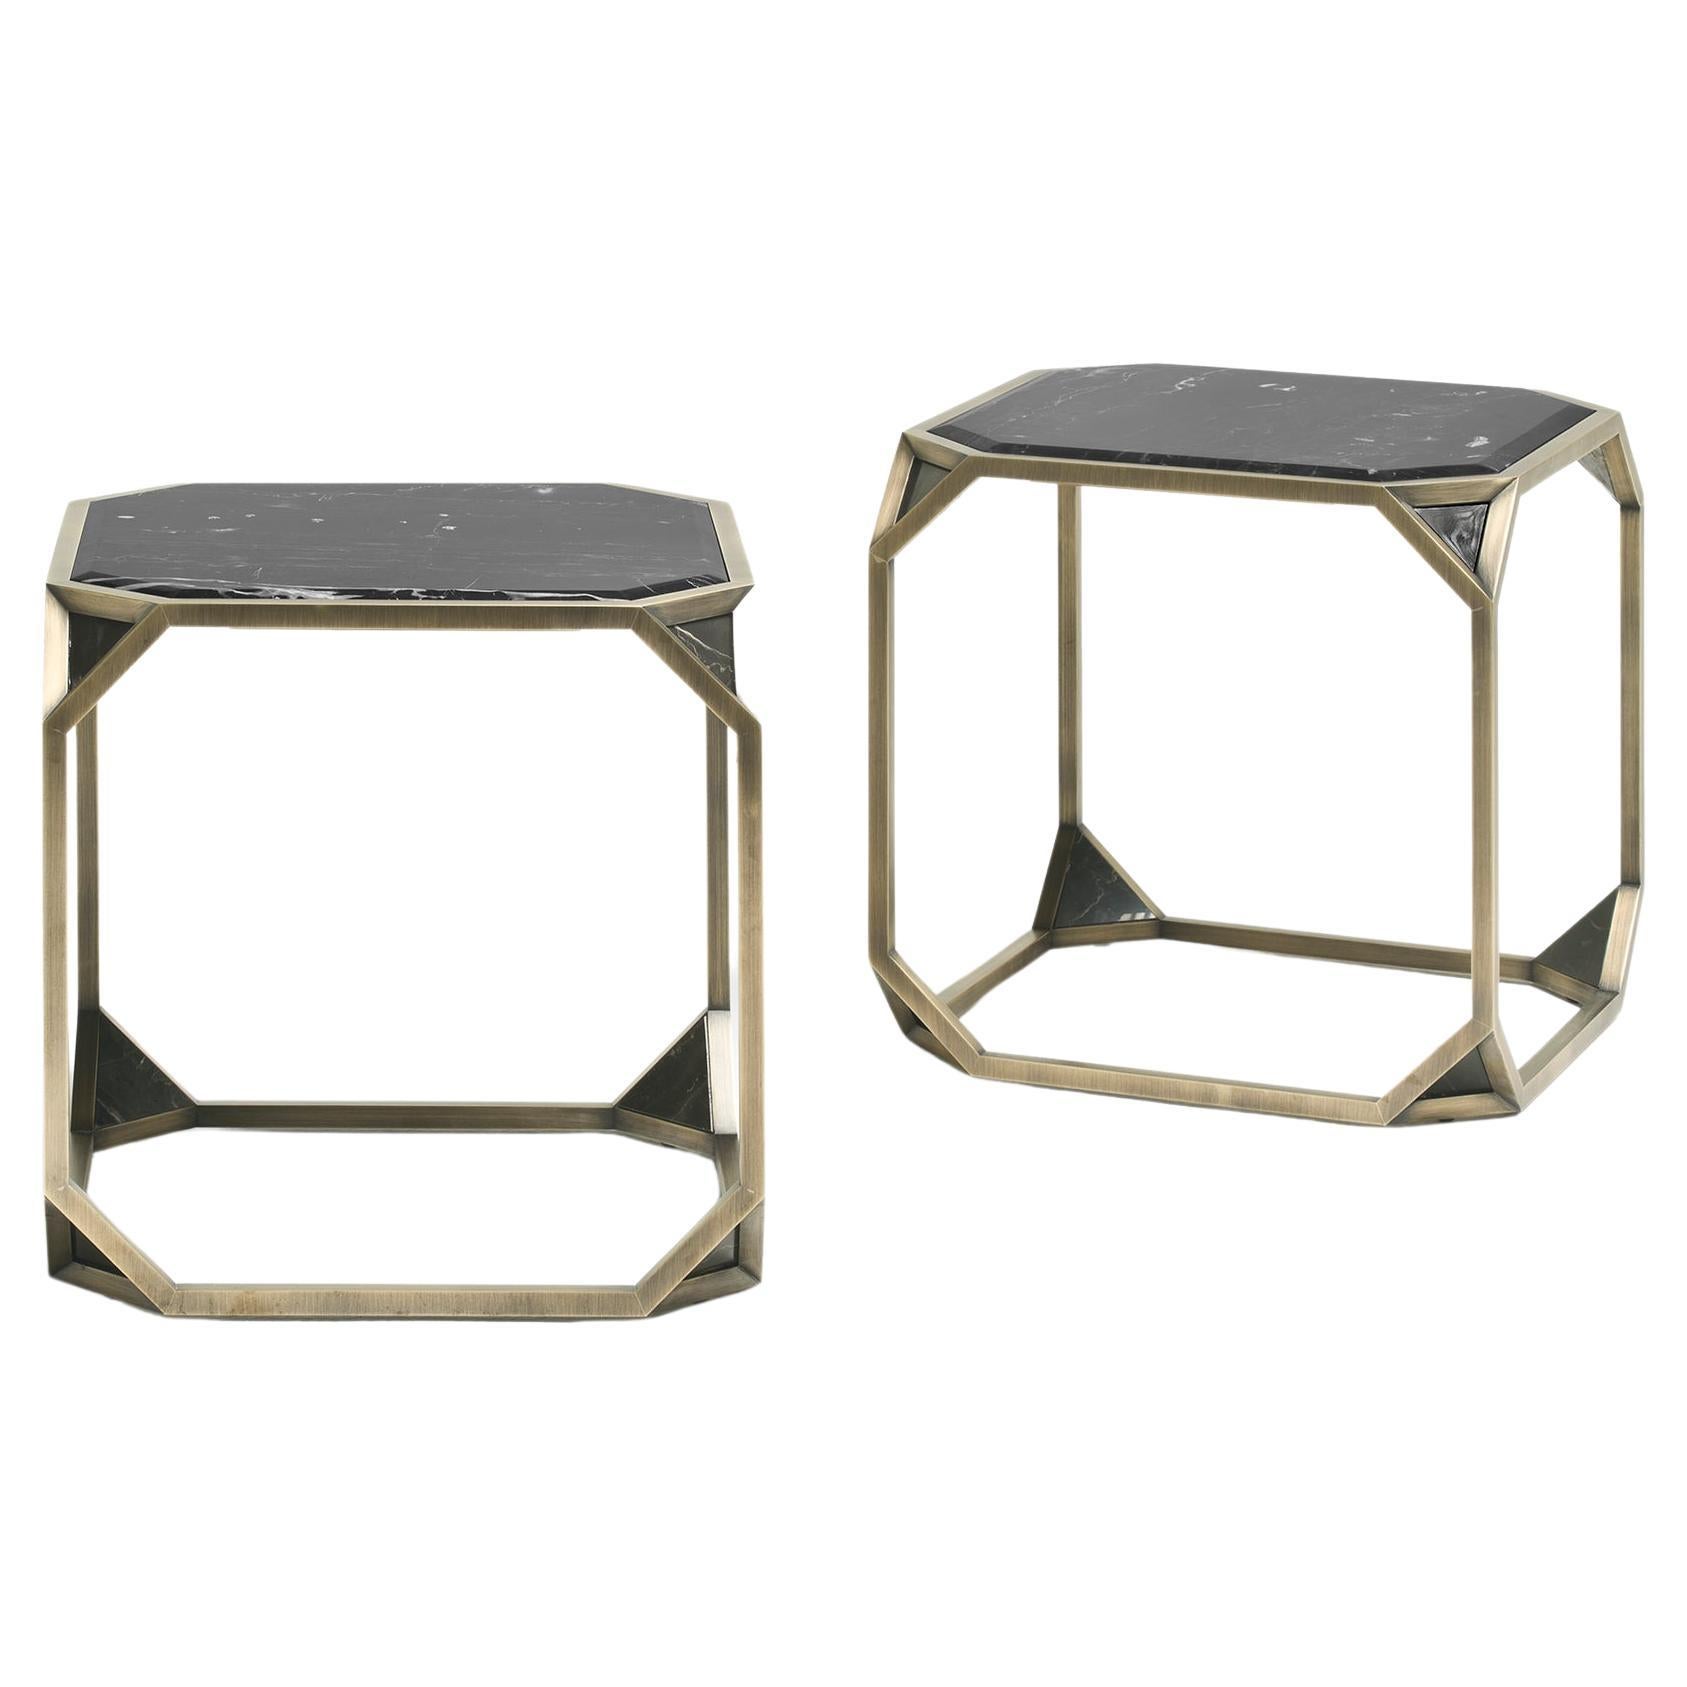 PARES Bedside Table in Bronzed Brass and Black Marble designed by ARXX Studio